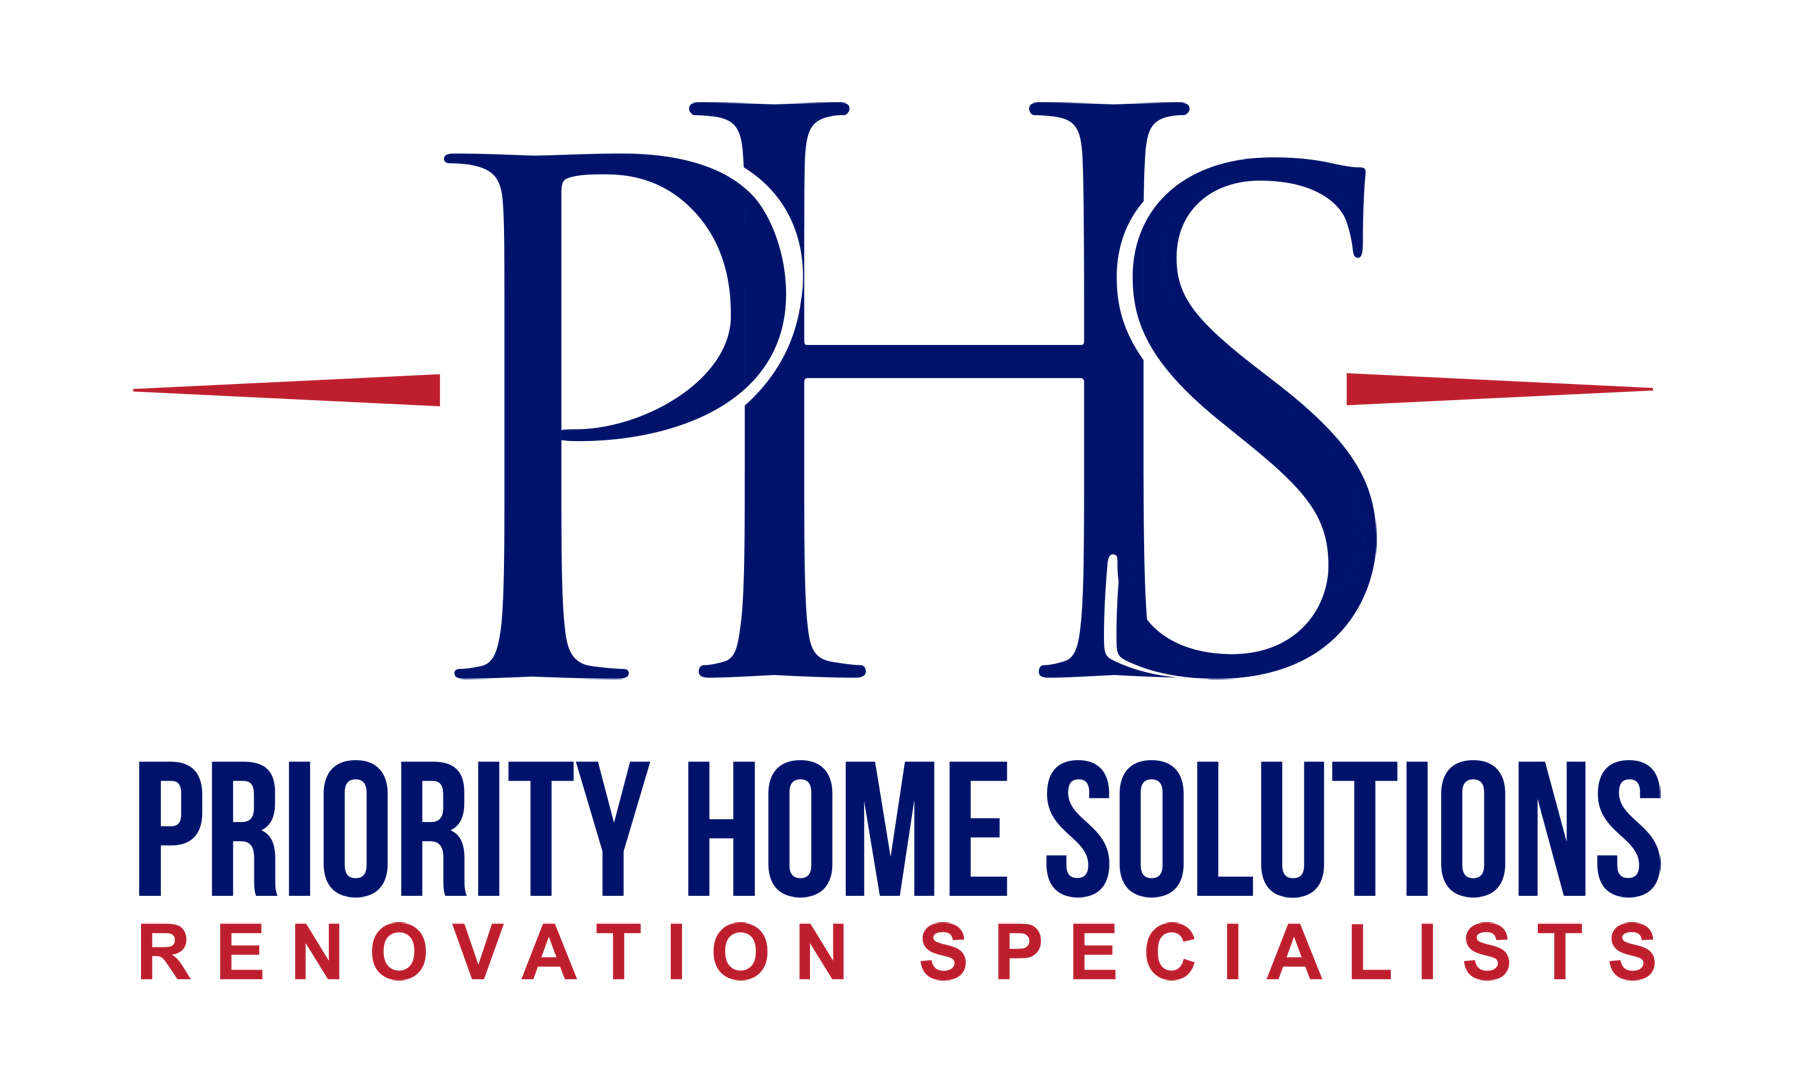 Priority Home Solutions, LLC Logo